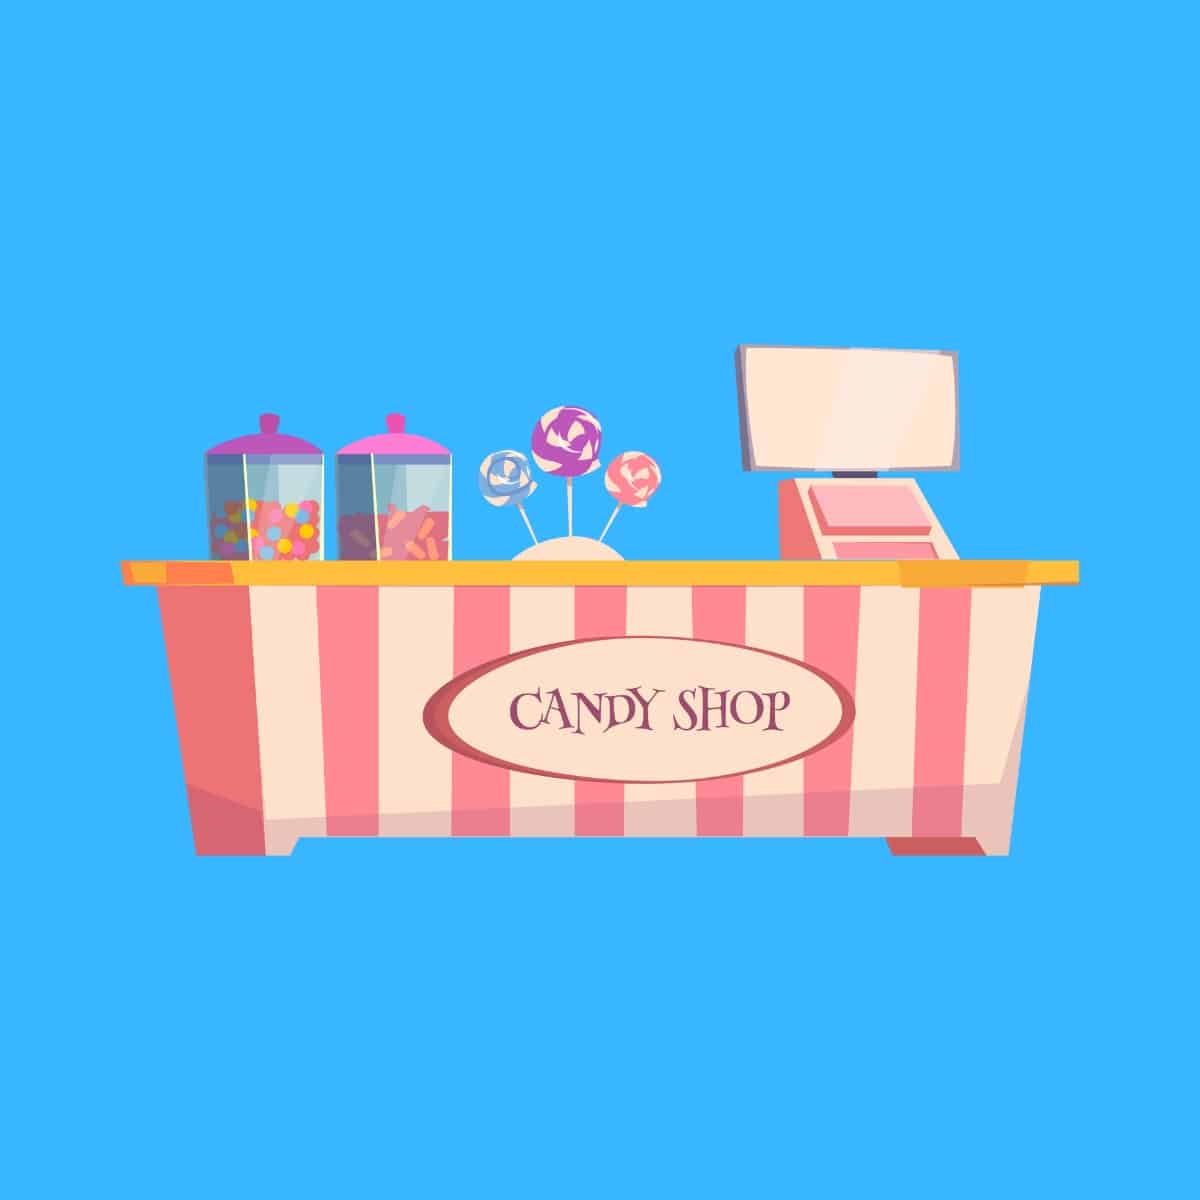 Cartoon graphic of a candy shop on blue background.